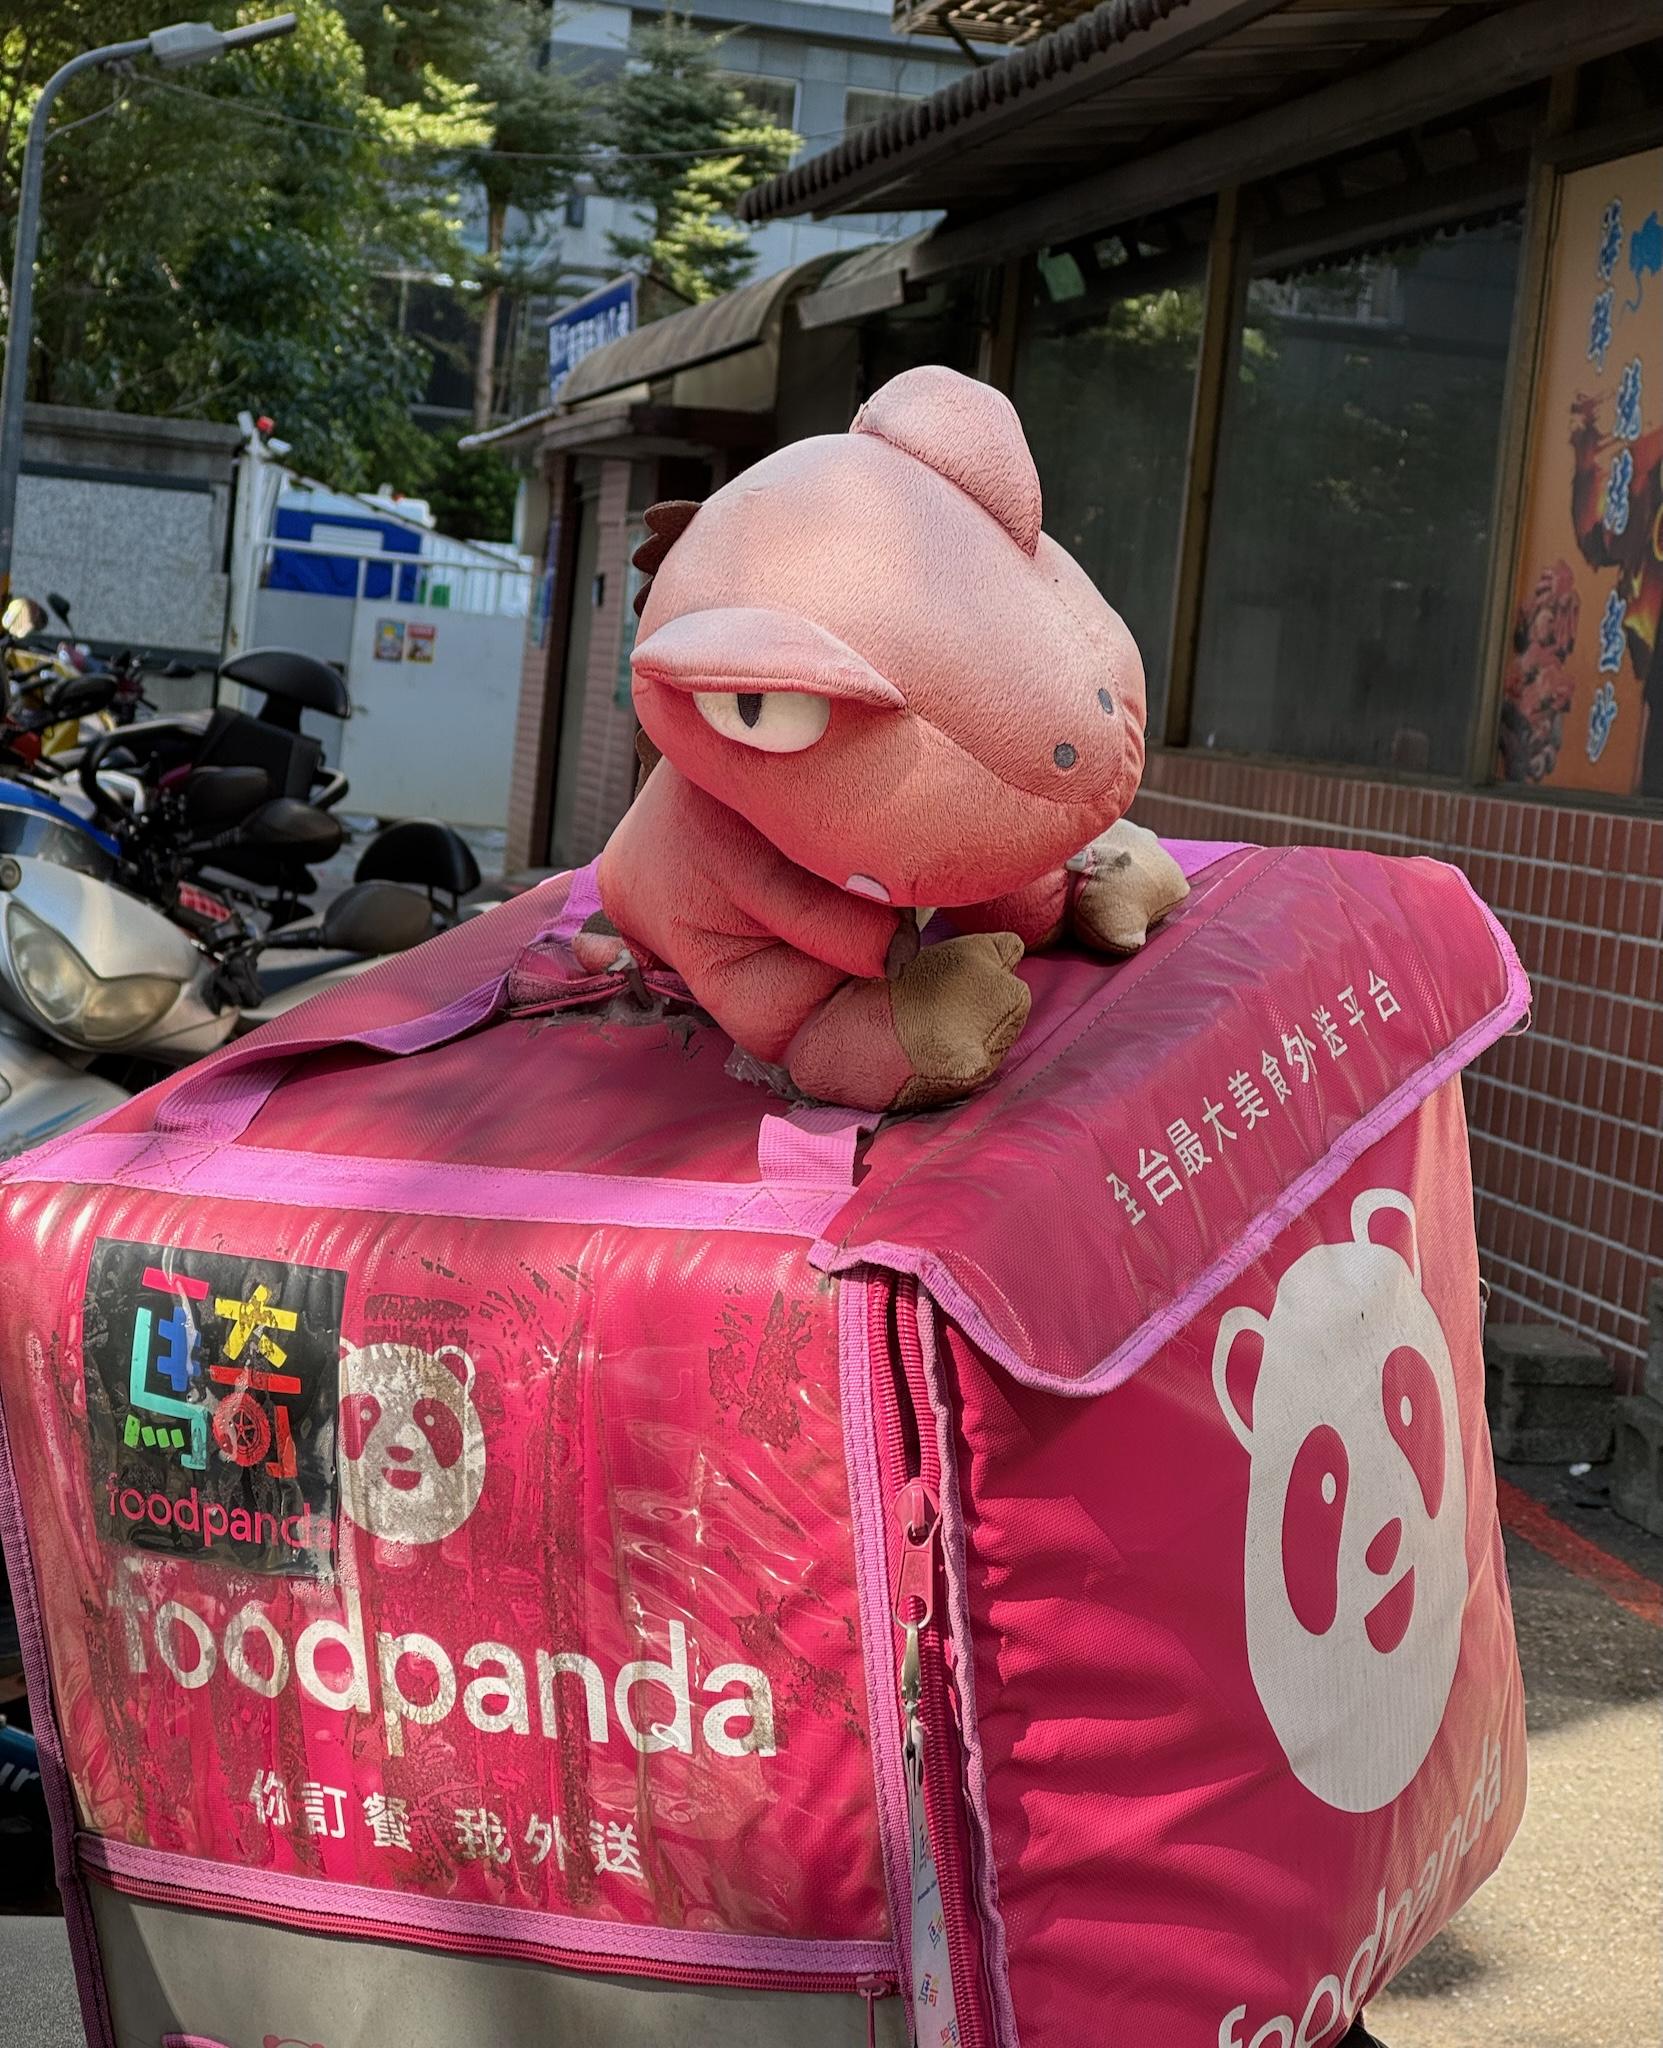 Foodpanda mascot plush on a delivery backpack on a scooter outside